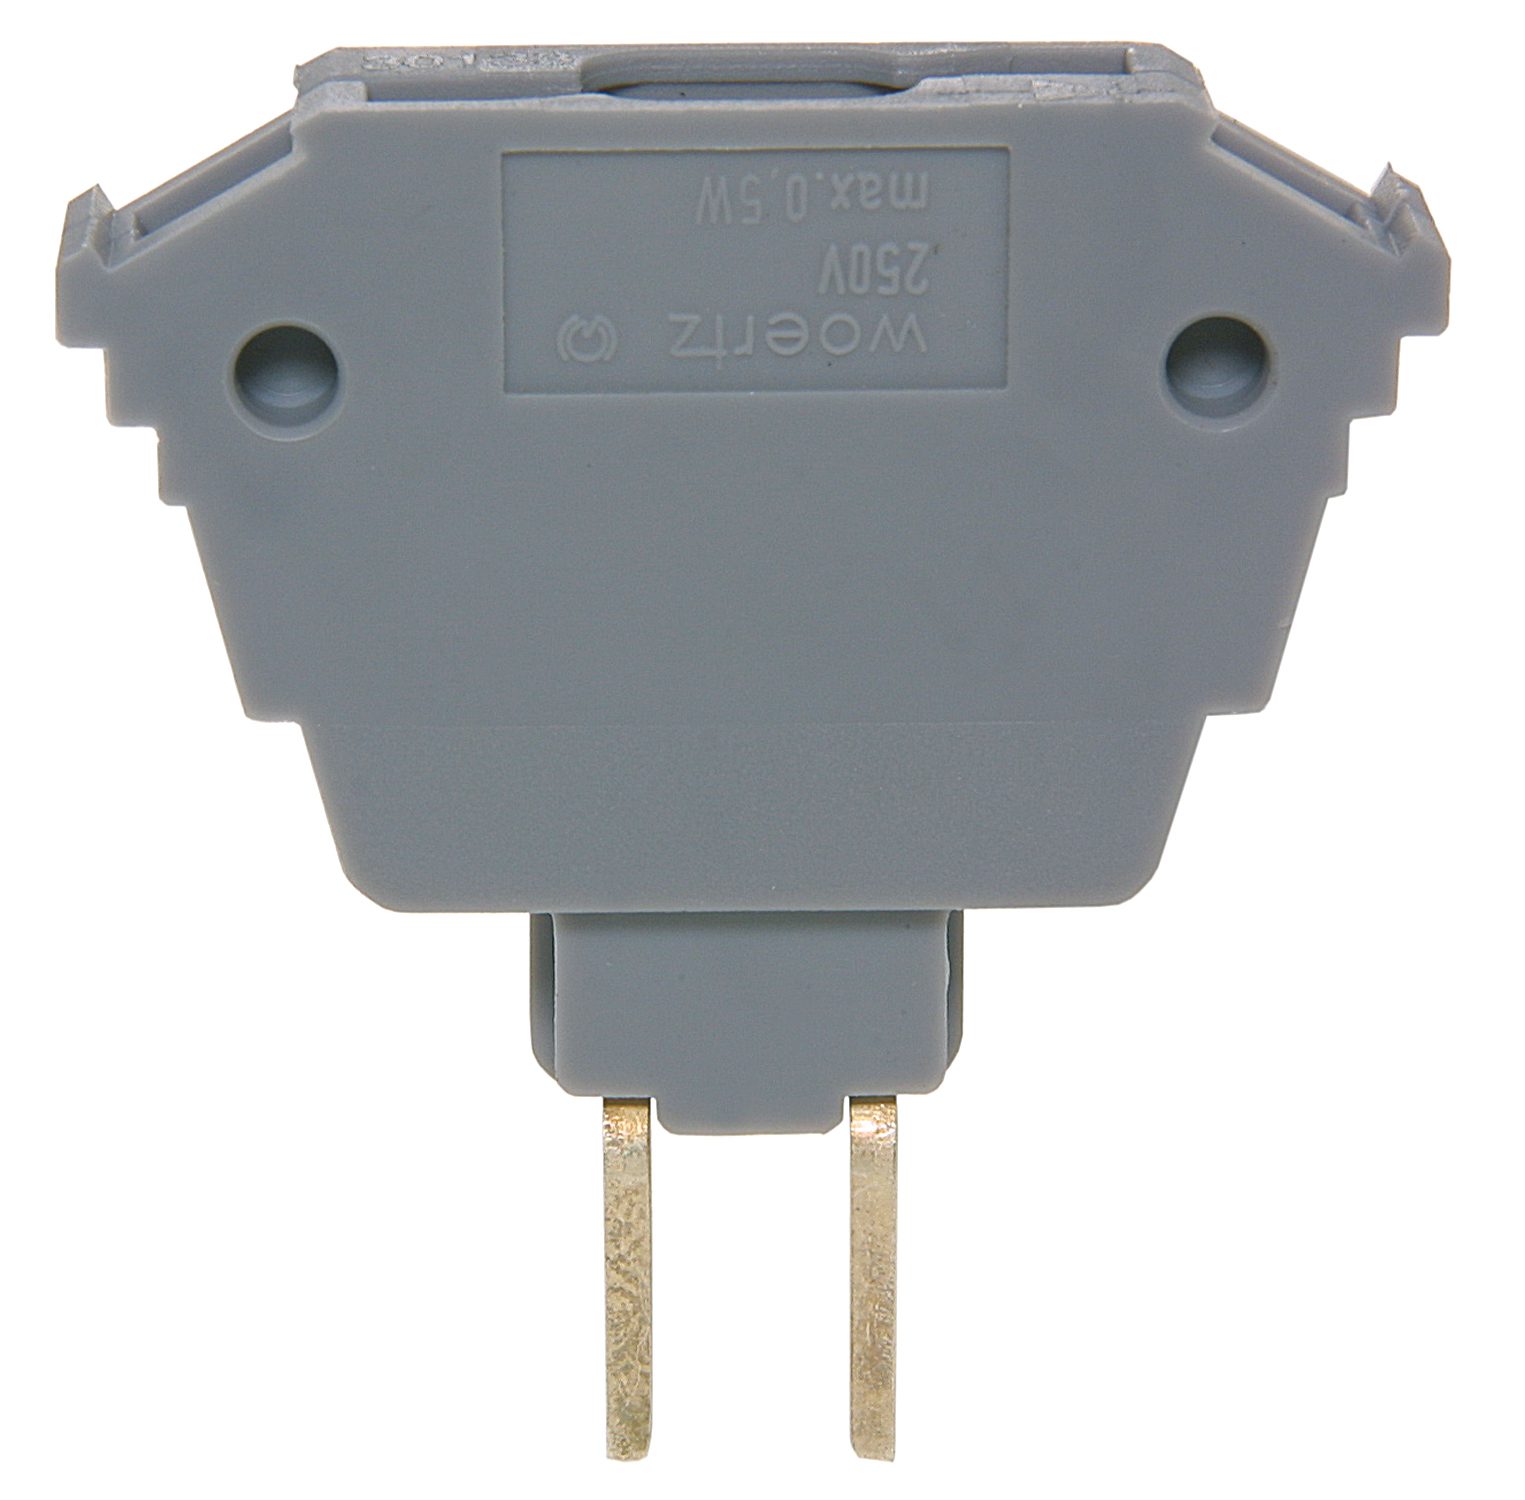 Diode plug with rectifier diode gray